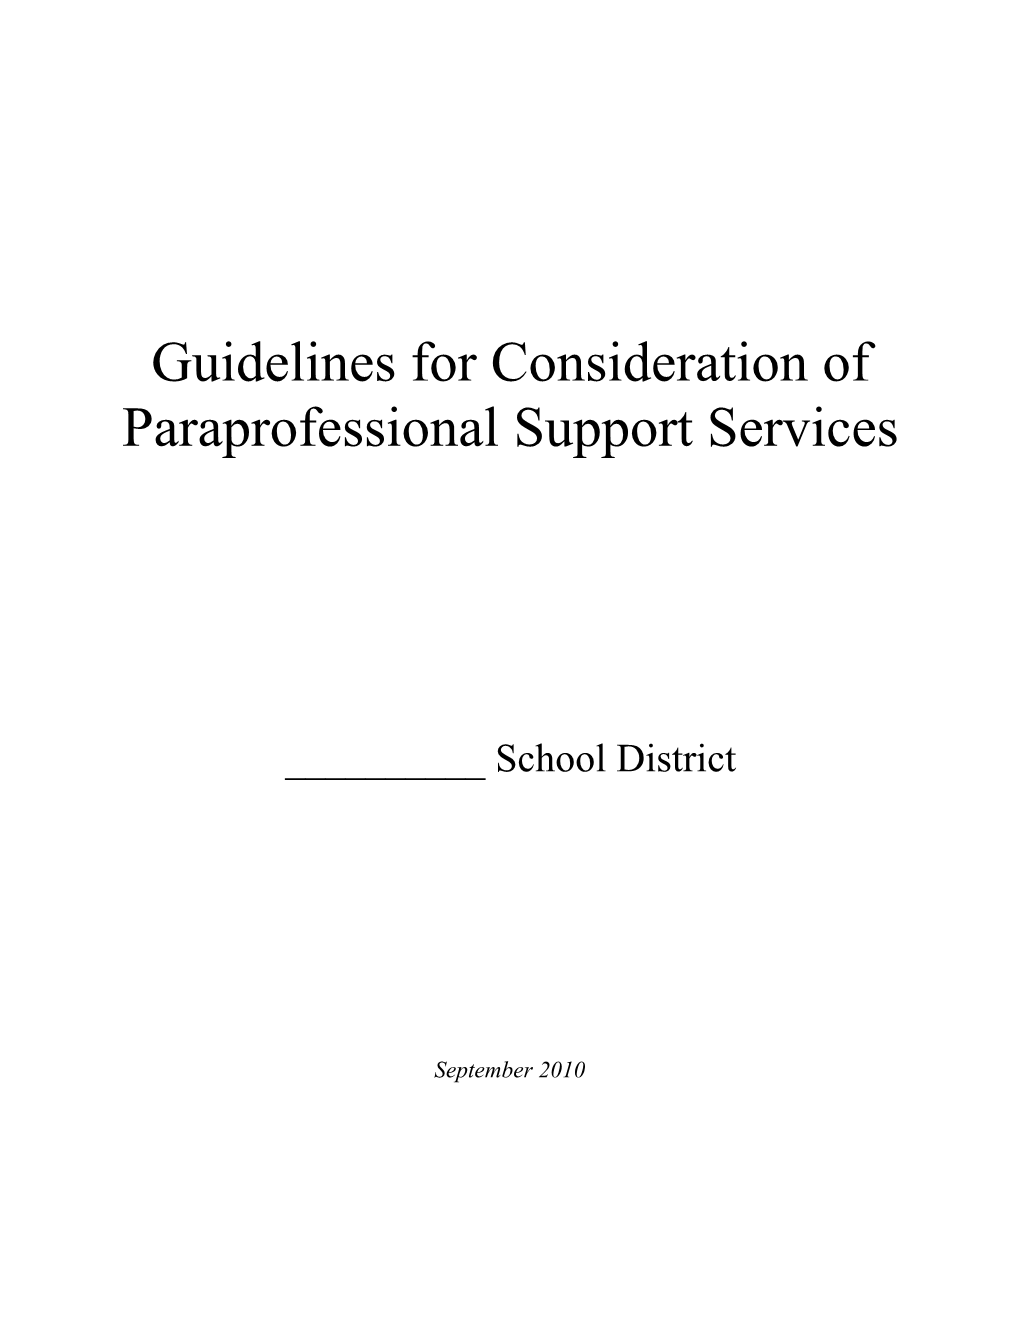 Guidelines for Consideration of Paraprofessional Support Services